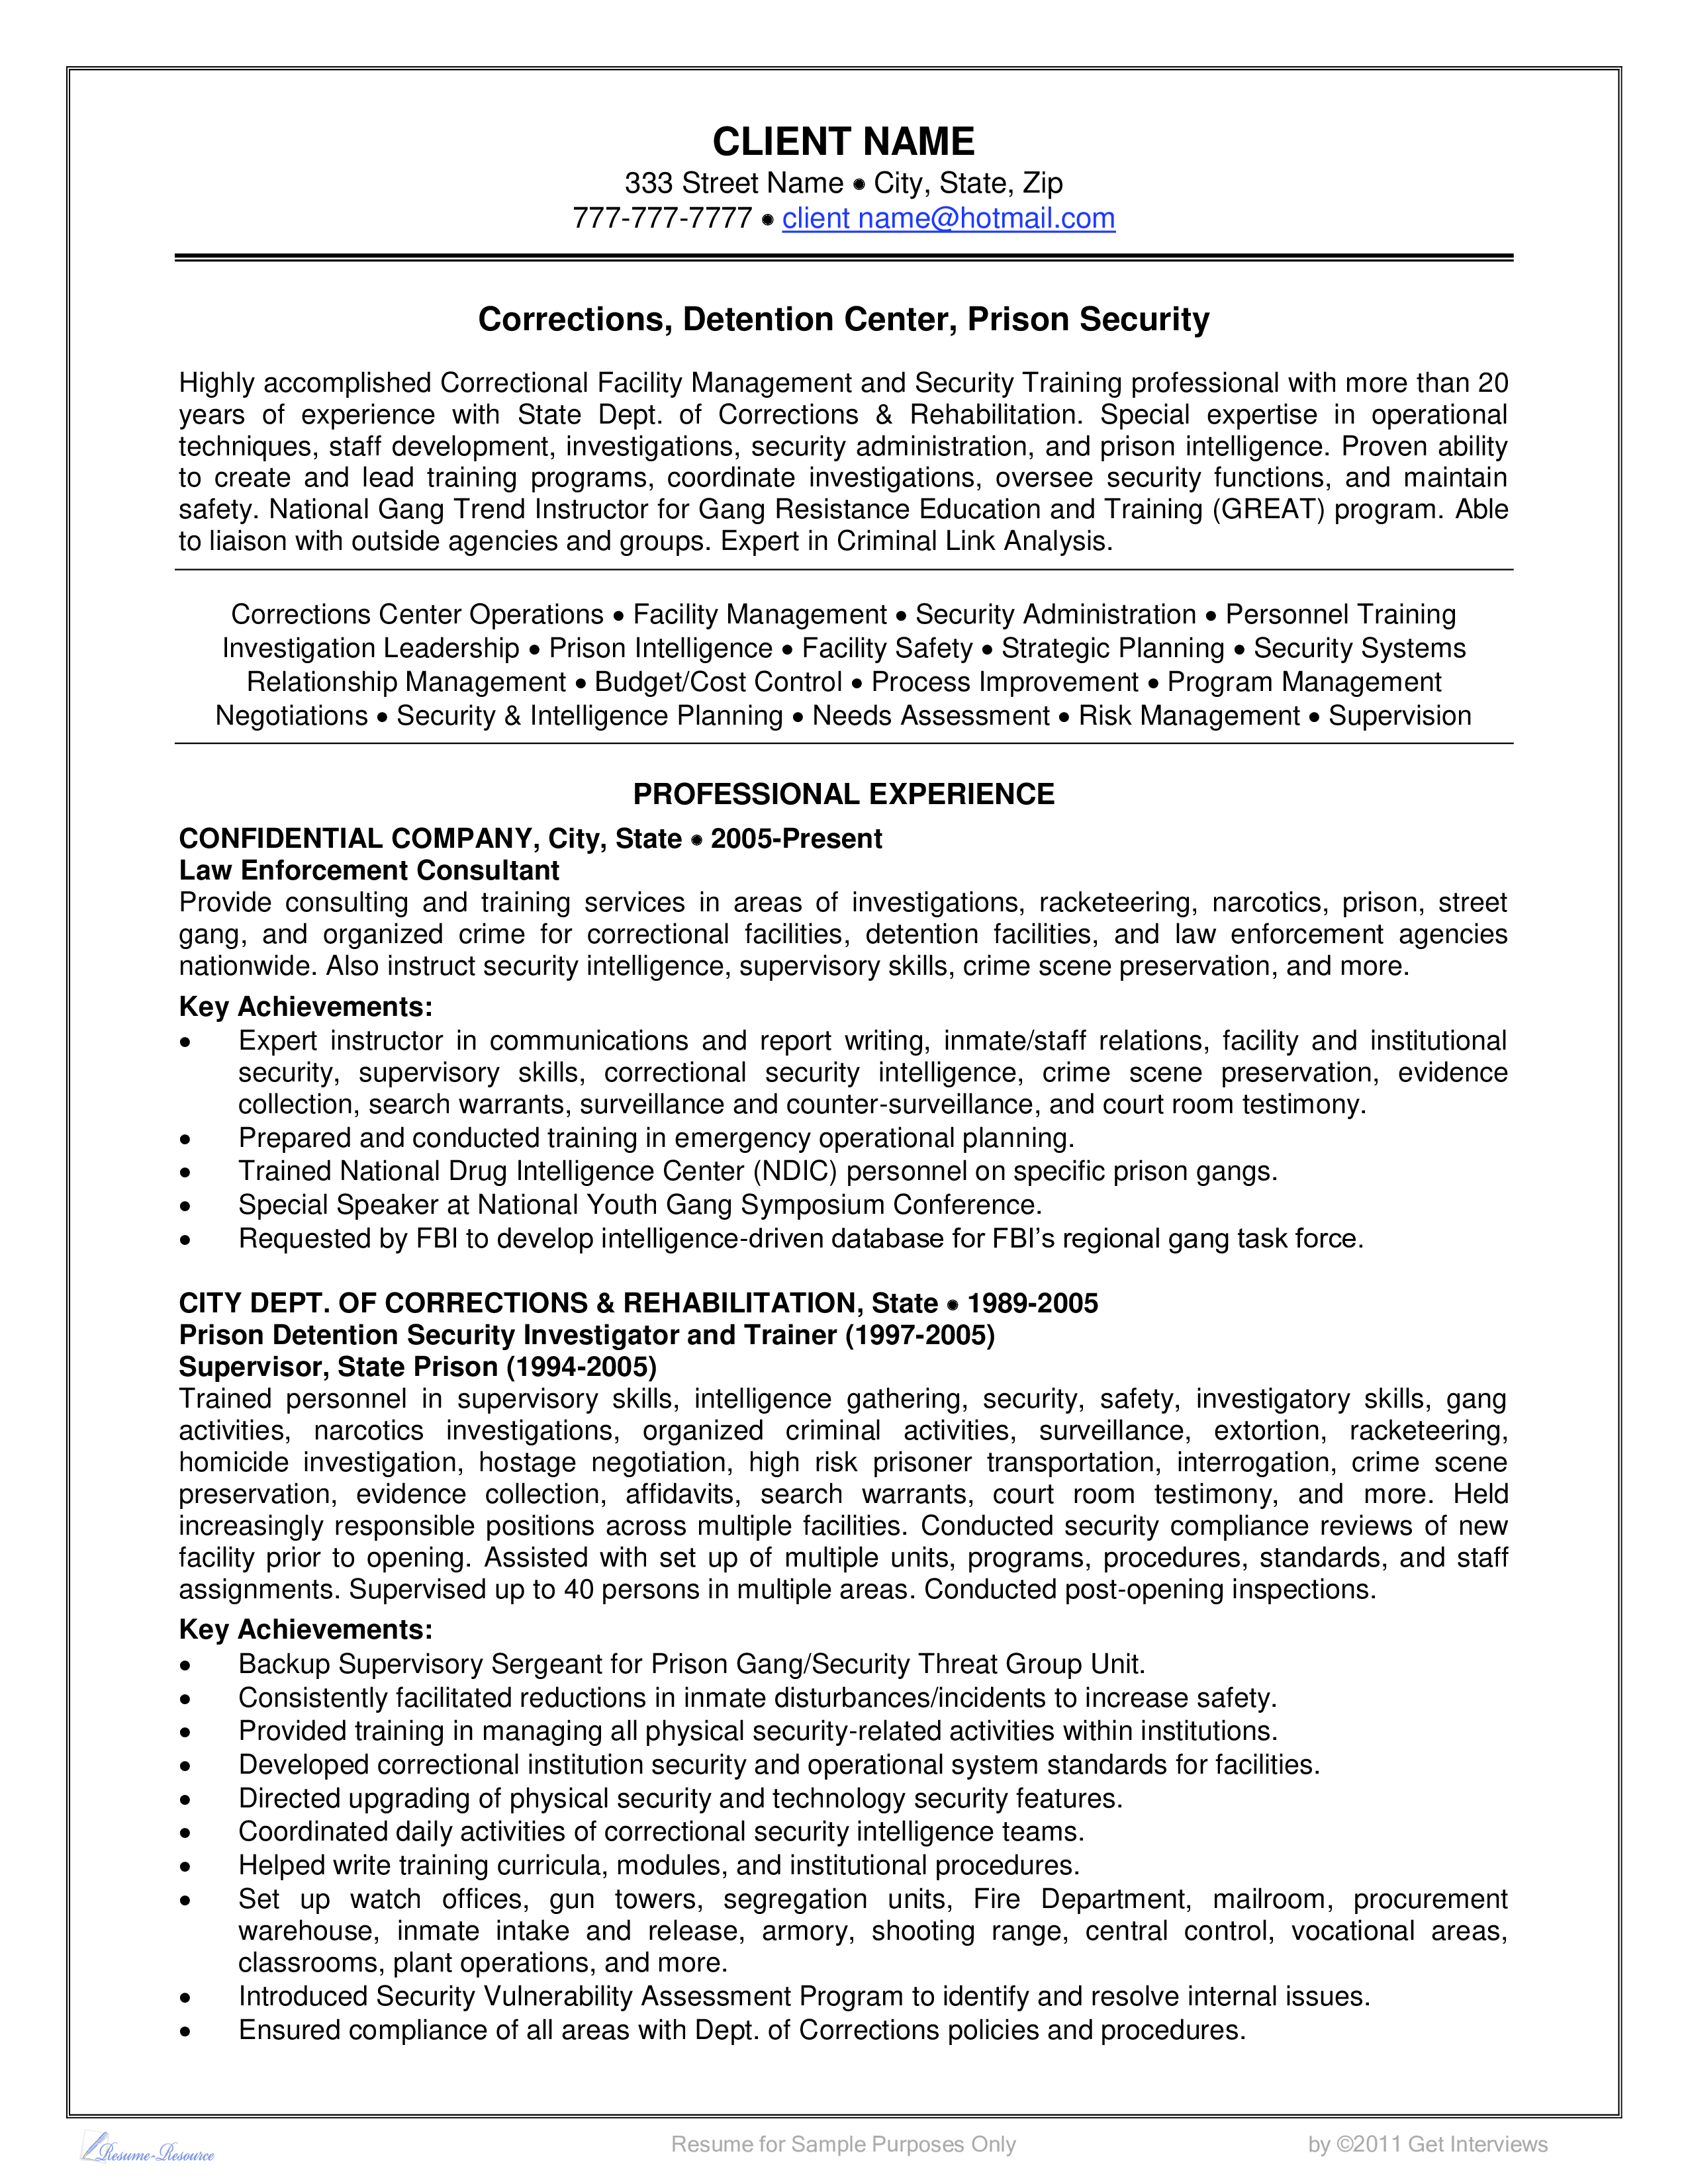 Security Officer Corrections Officer Resume Example main image